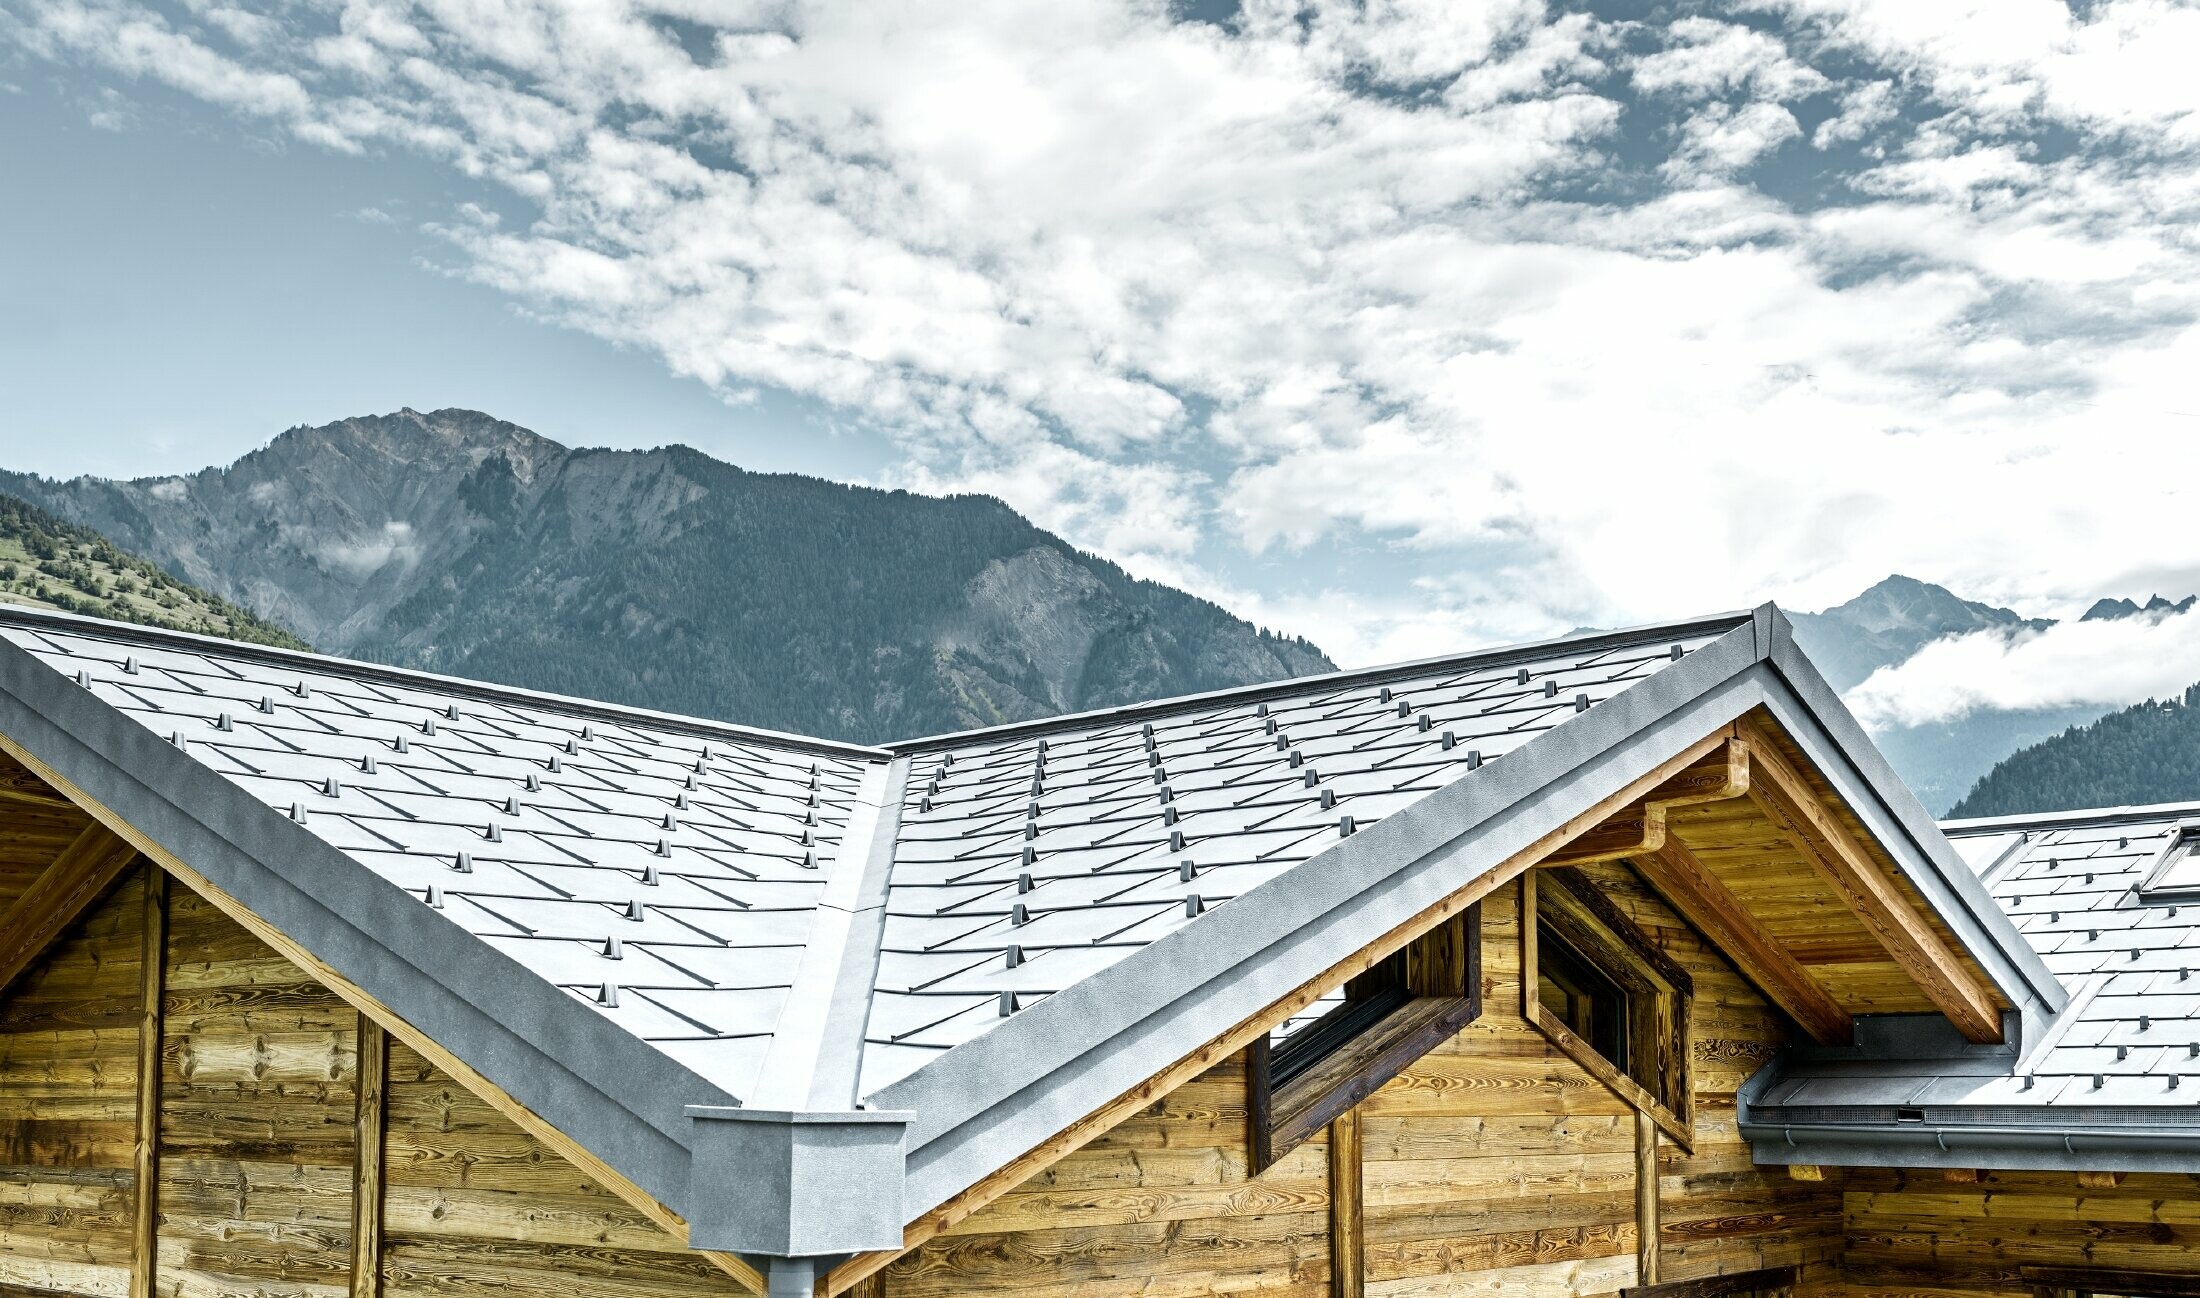 Roof of a rustic cottage in Switzerland with wooden façade and a PREFA aluminium roof. The R.16 roof tile in stone grey was installed. The angled roof and valley are clearly distinguishable.